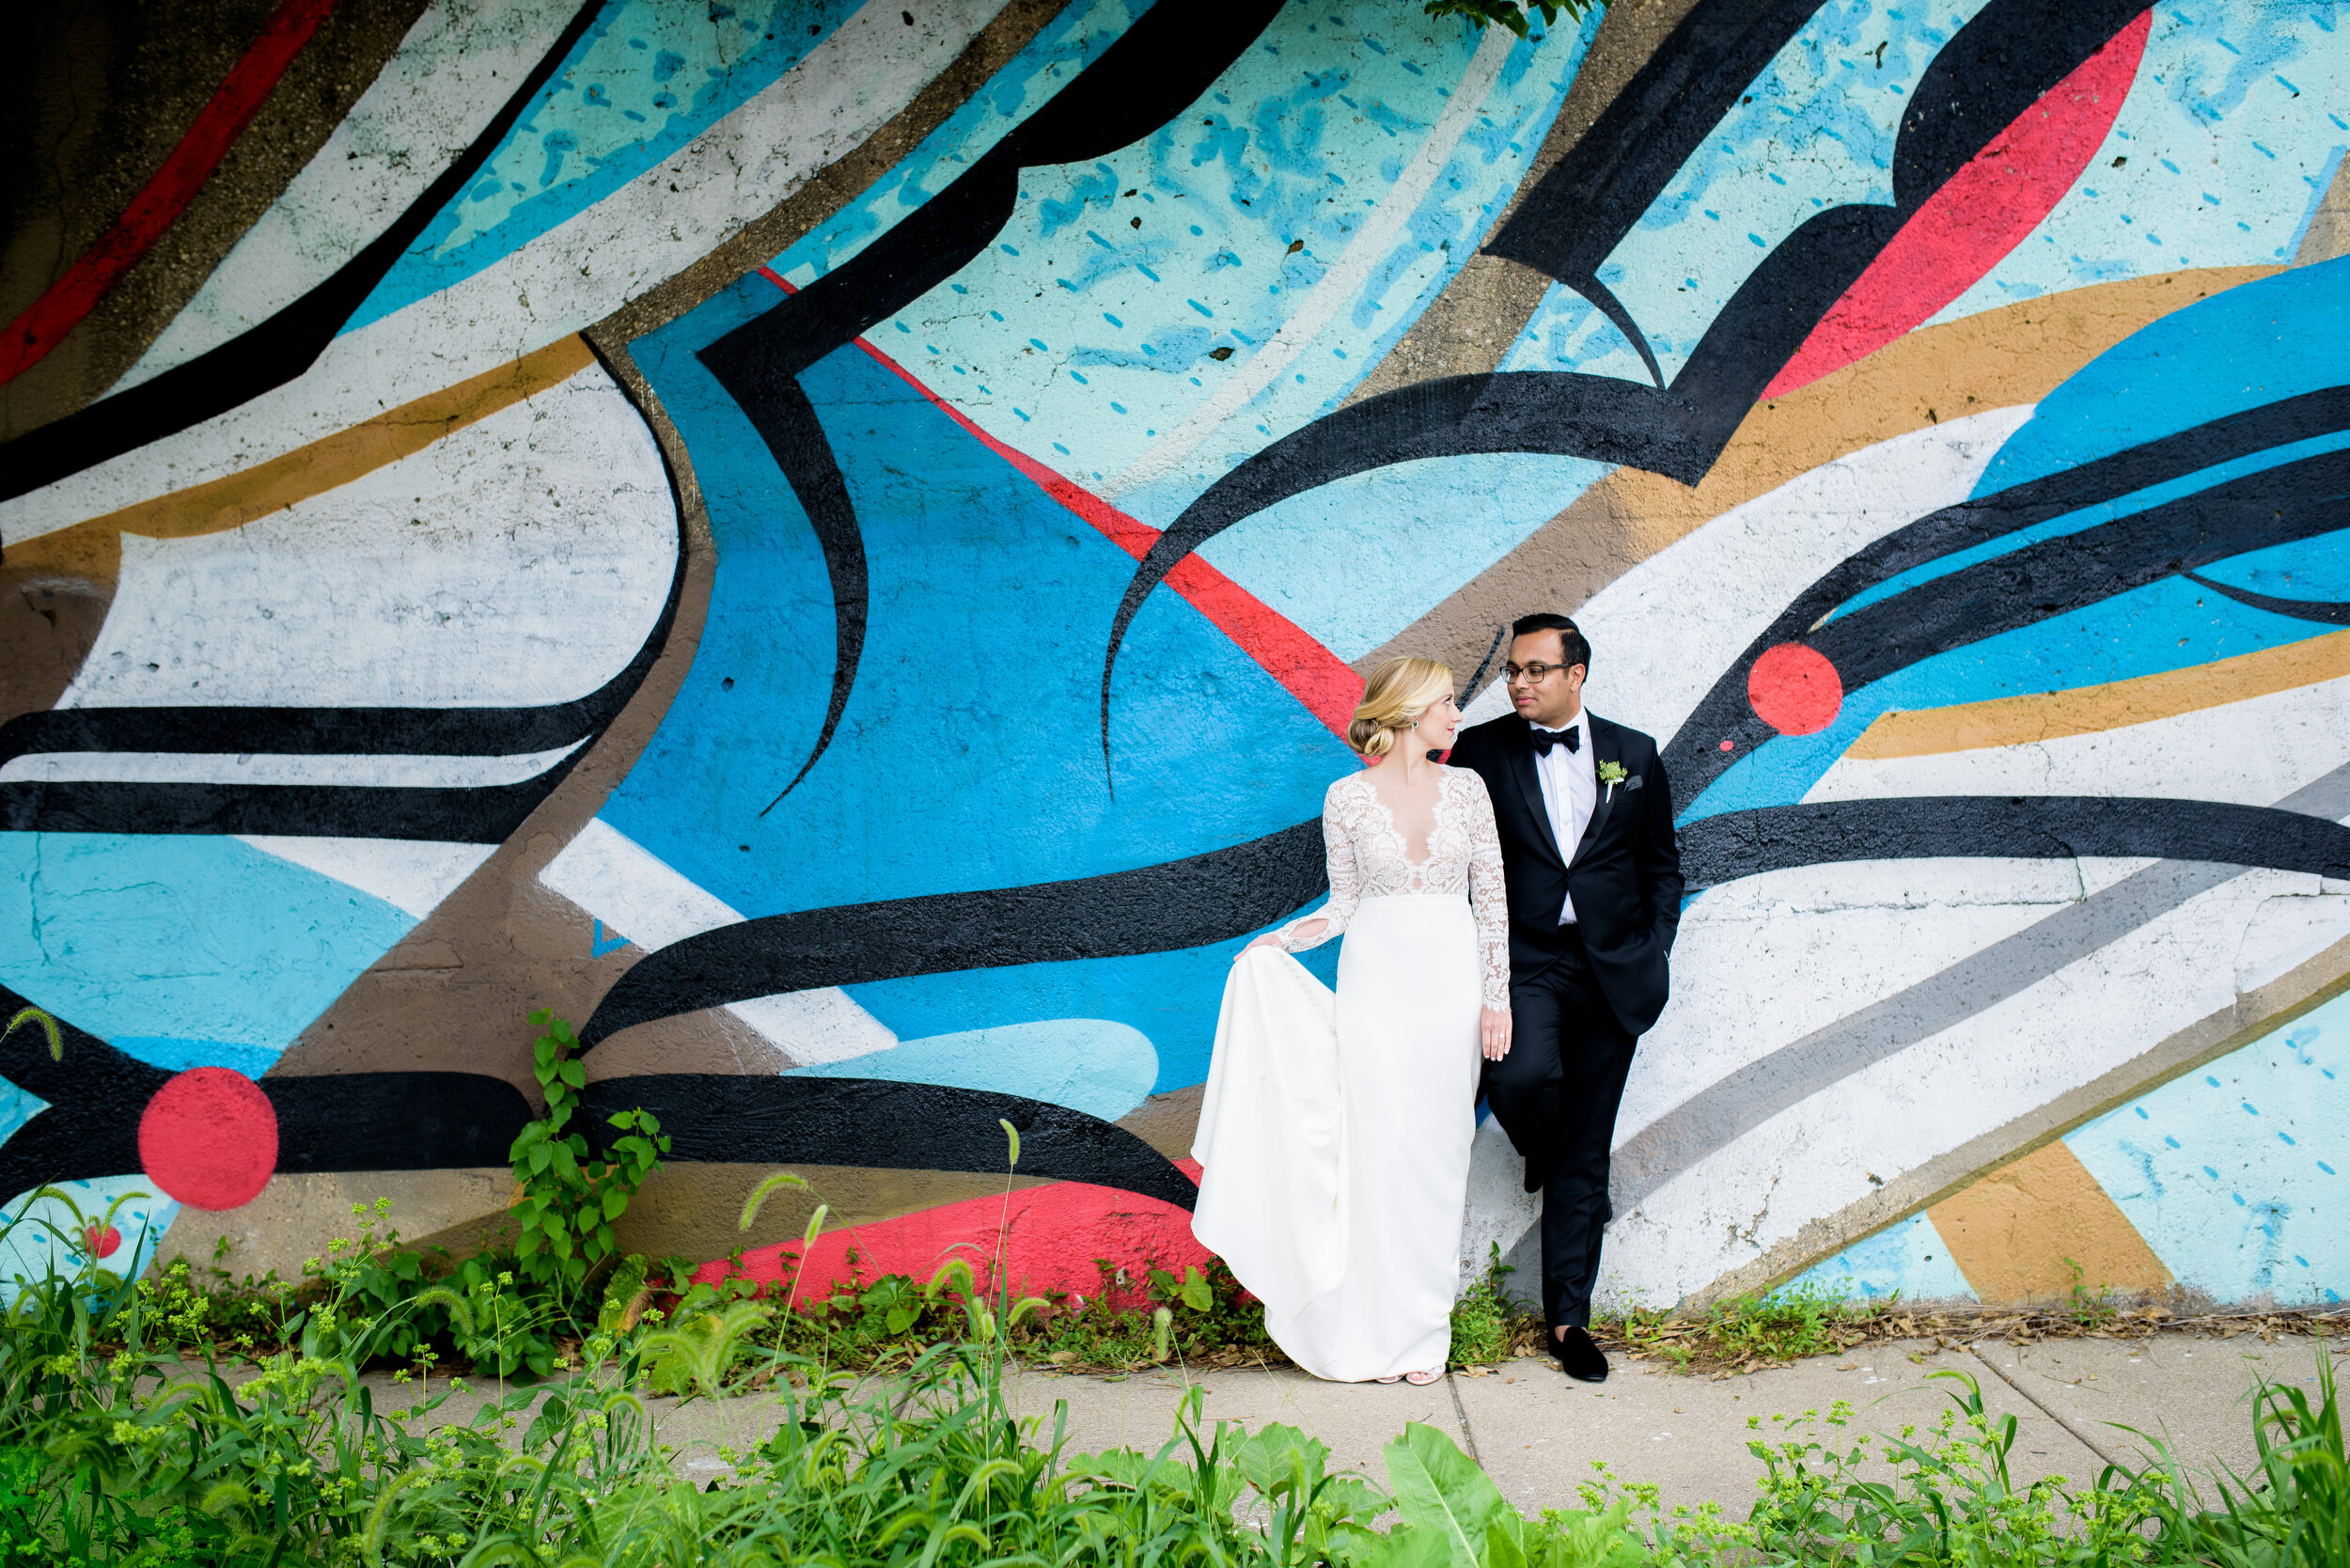 Creative wedding photo of bride and groom with street art mural in Pilsen: Geraghty Chicago wedding photography captured by J. Brown Photography.